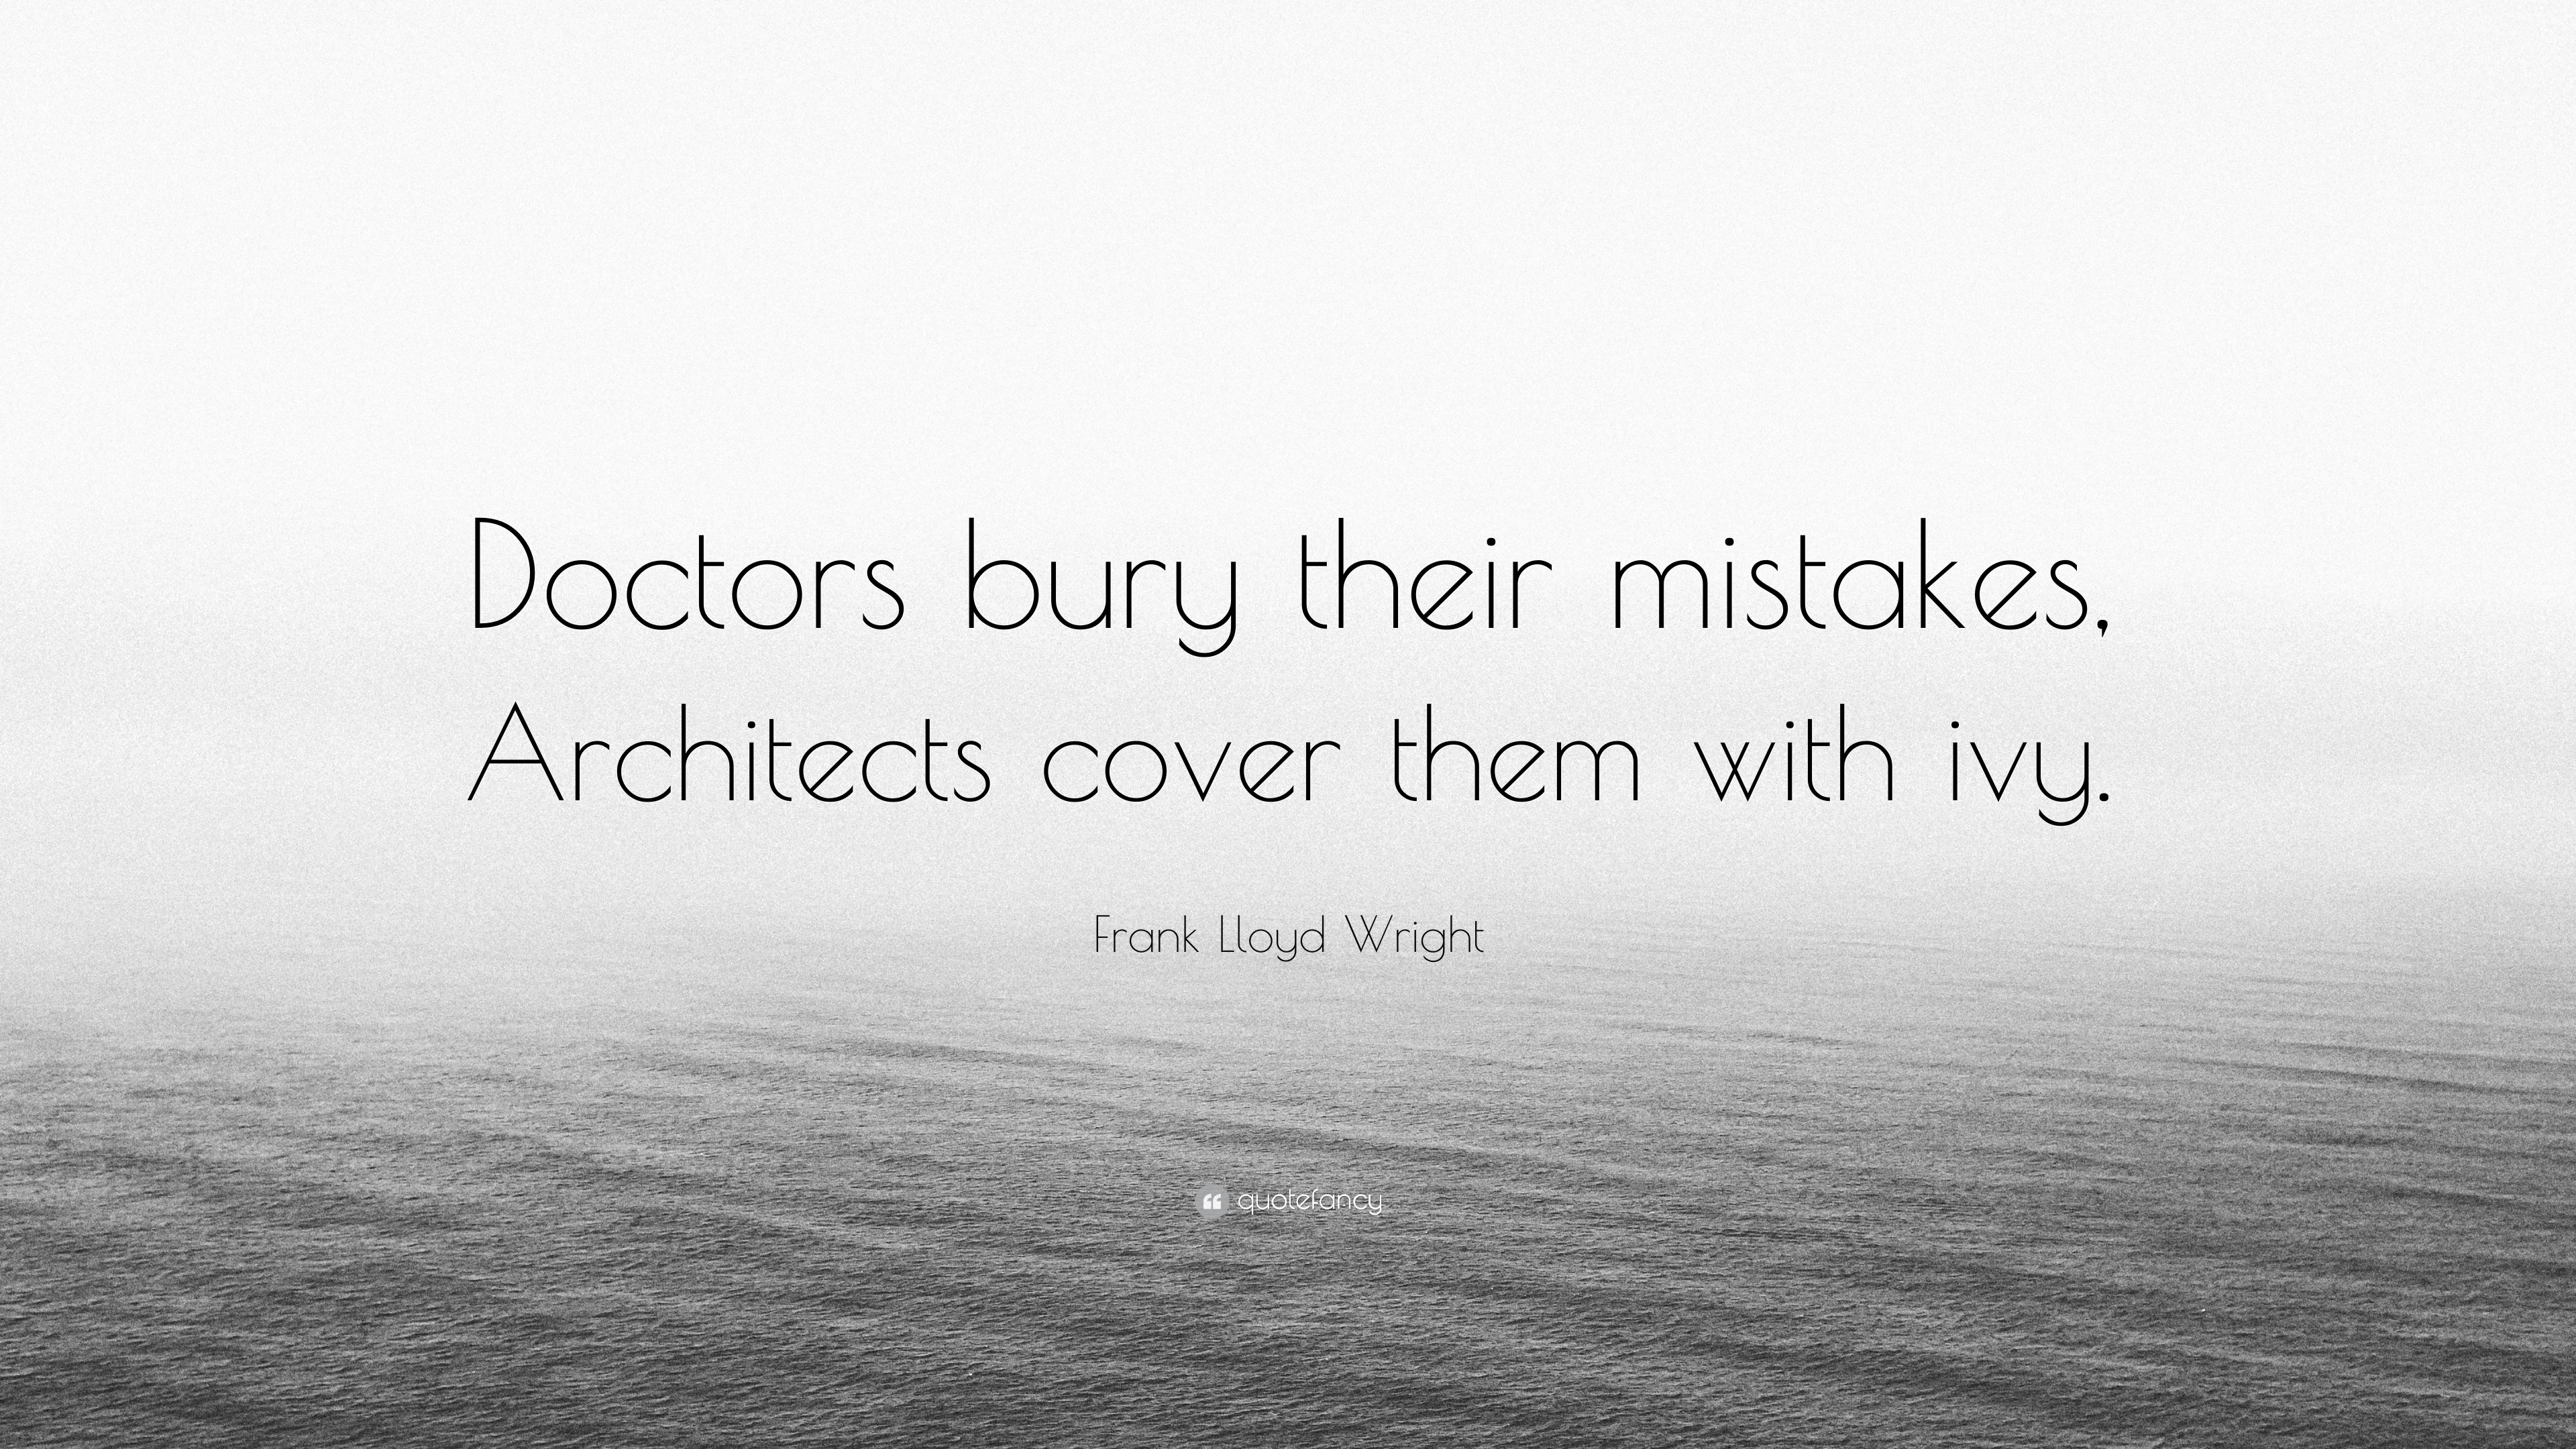 Frank Lloyd Wright Quote Doctors Bury Their Mistakes Architects Images, Photos, Reviews